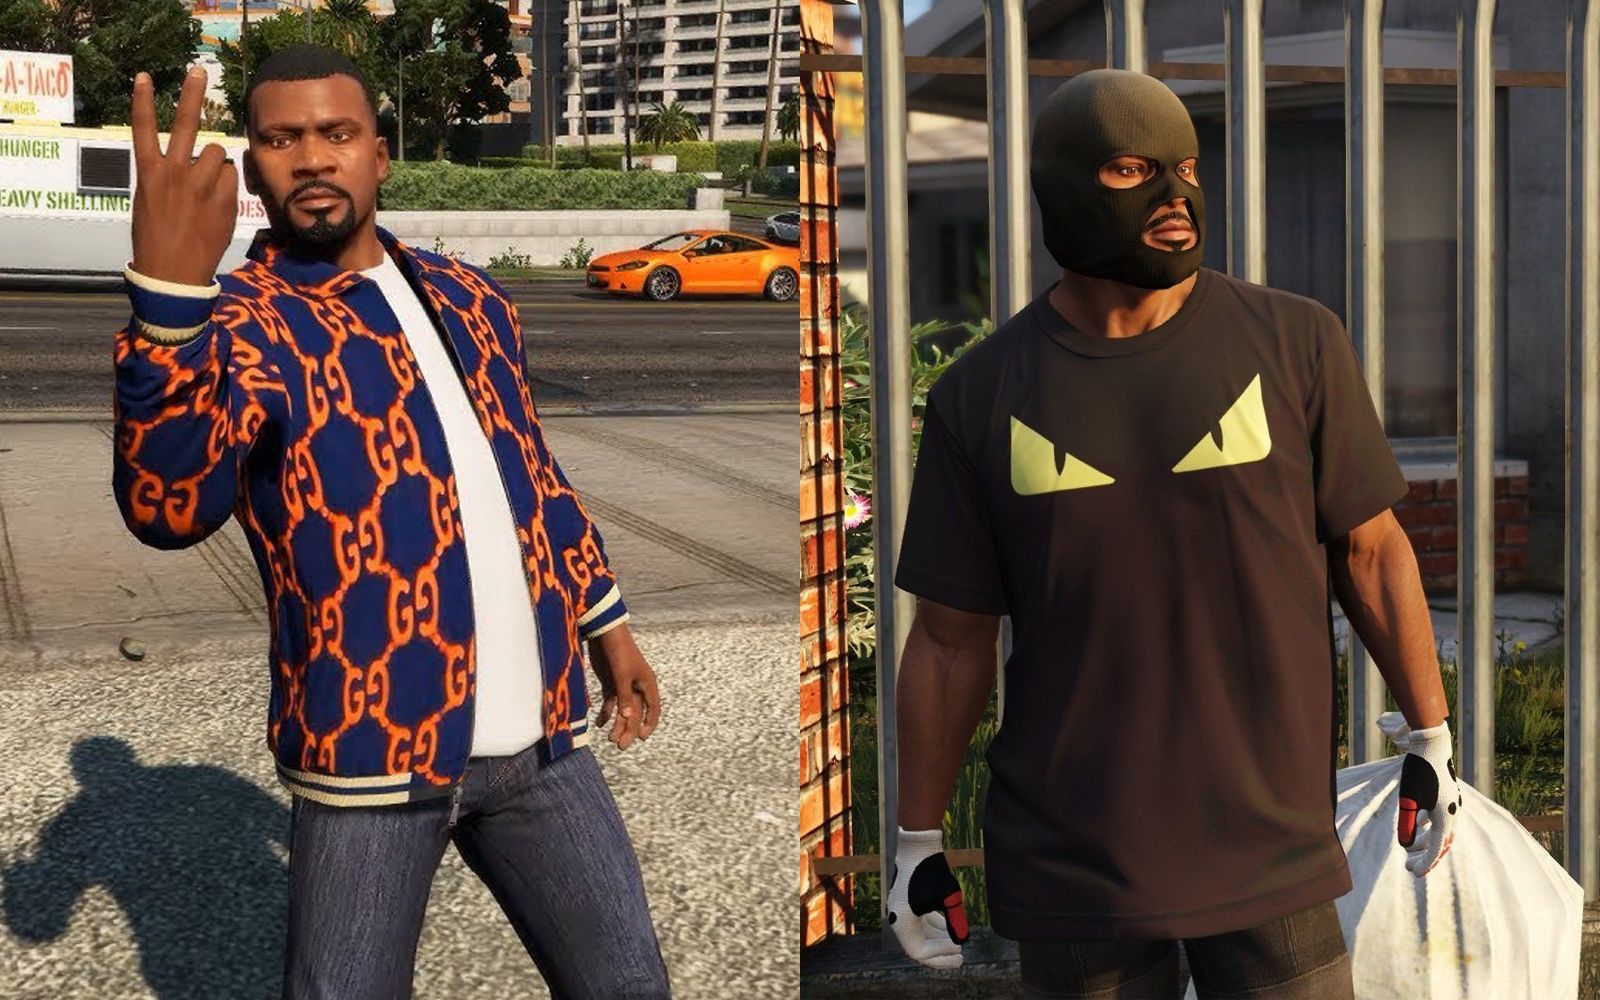 How far fashion can go in Grand Theft Auto After Fortnite, could metafashion also arrive in the Rockstar saga?